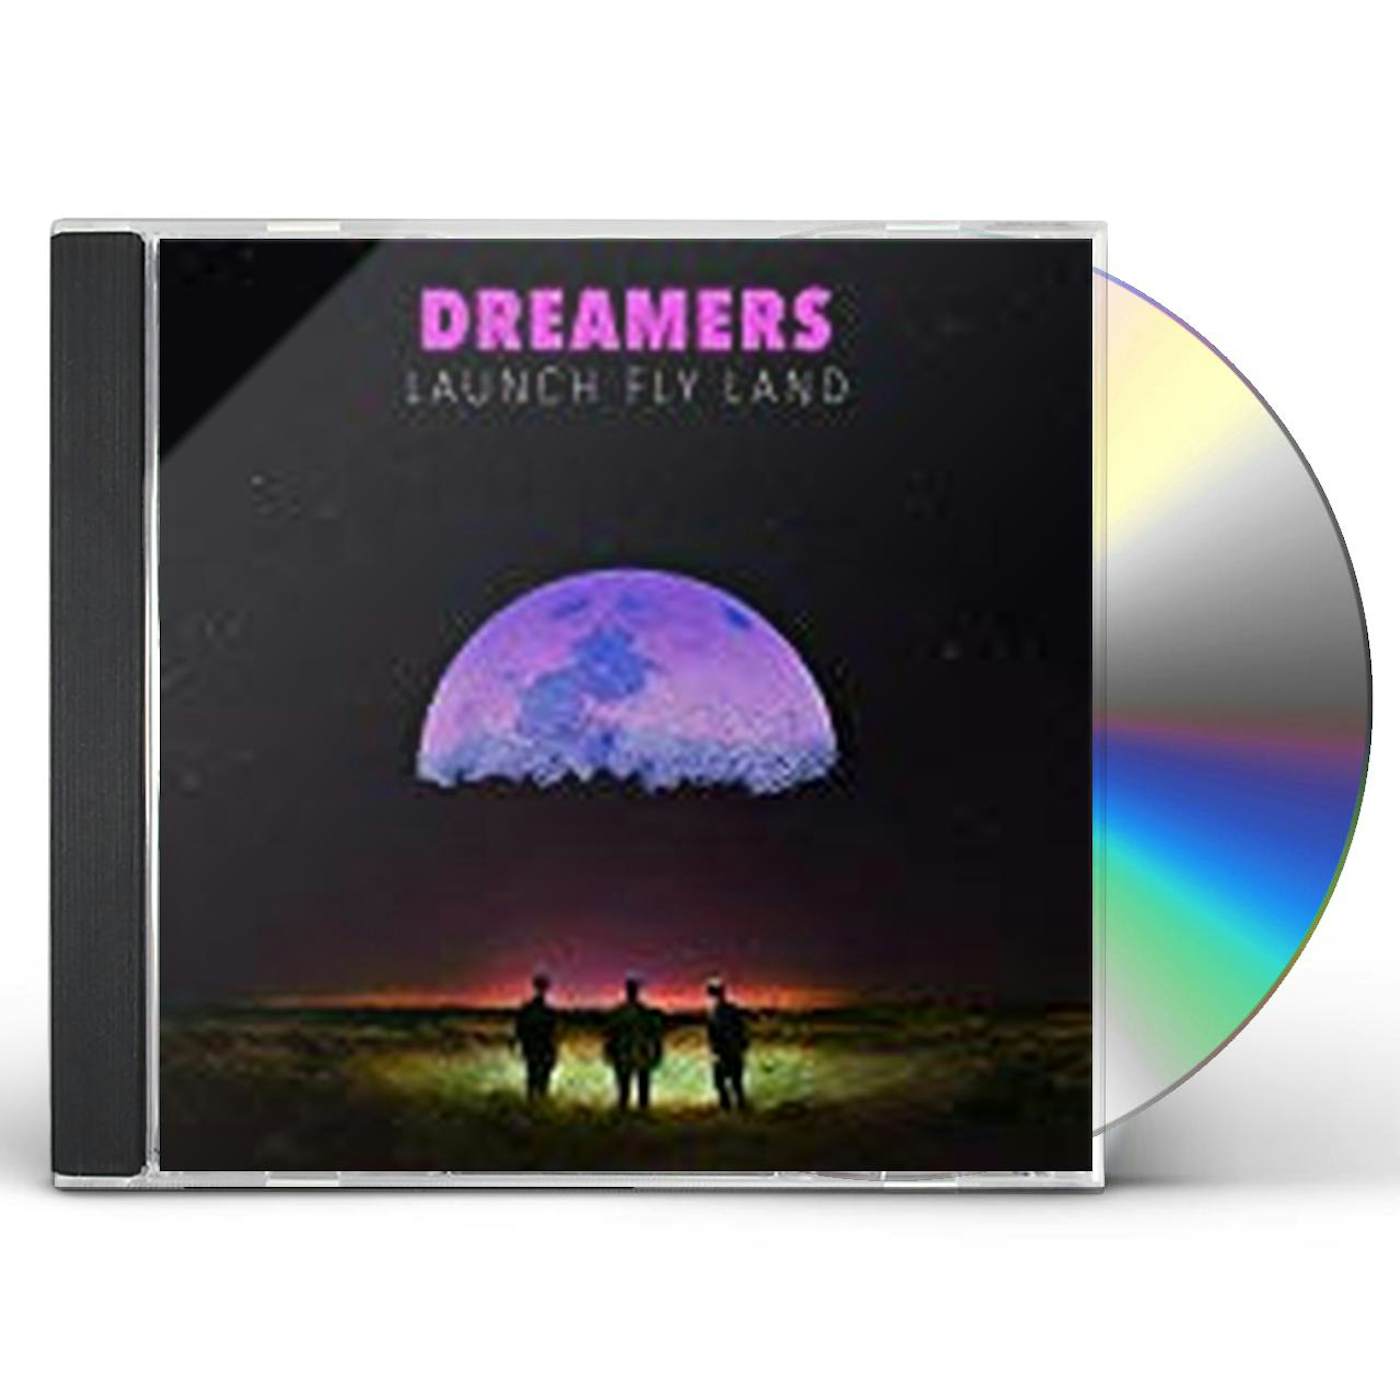 DREAMERS LAUNCH, FLY, LAND CD